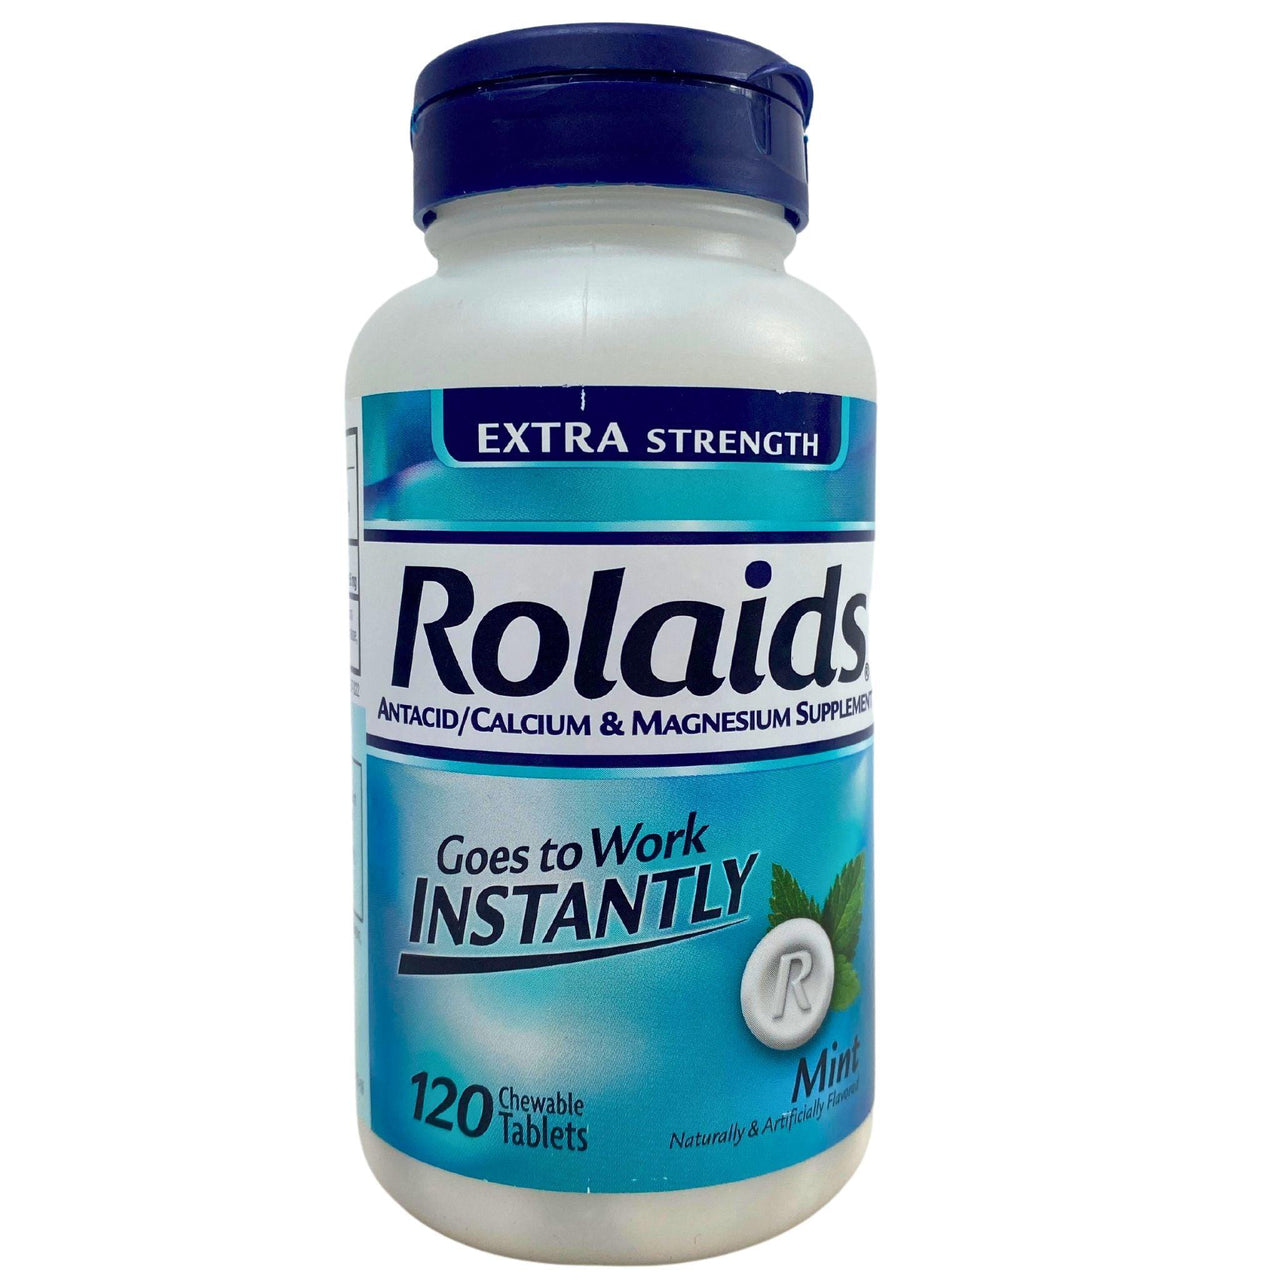 Rolaids Antacid/Calcium & Magnesium Supplement Goes to Work Instantly 120 Chewable Tablets (50 Pcs Lot) - Discount Wholesalers Inc